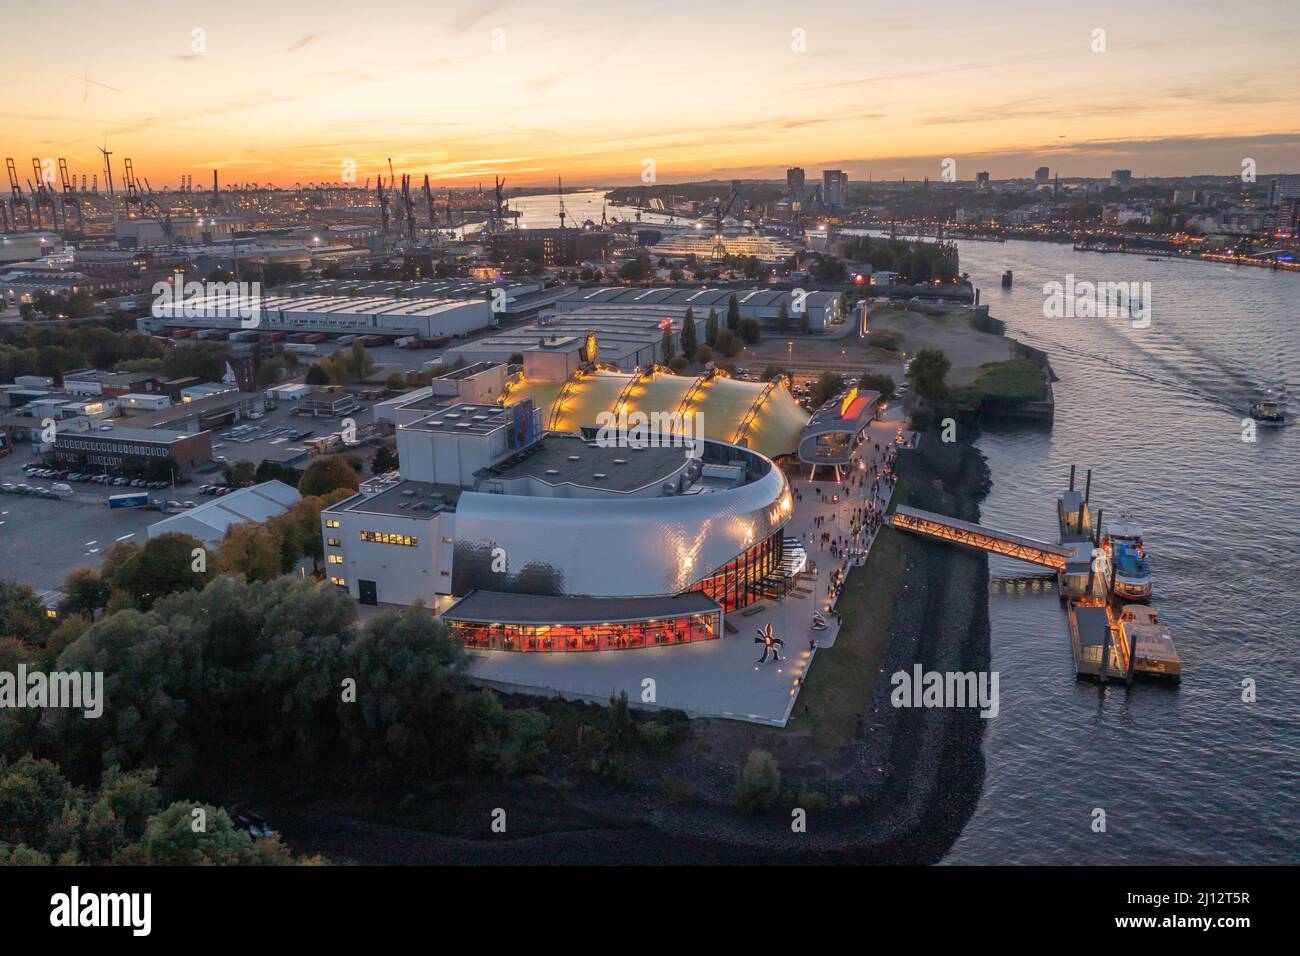 aerial view of the stage theater in the port of hamburg Stock Photo